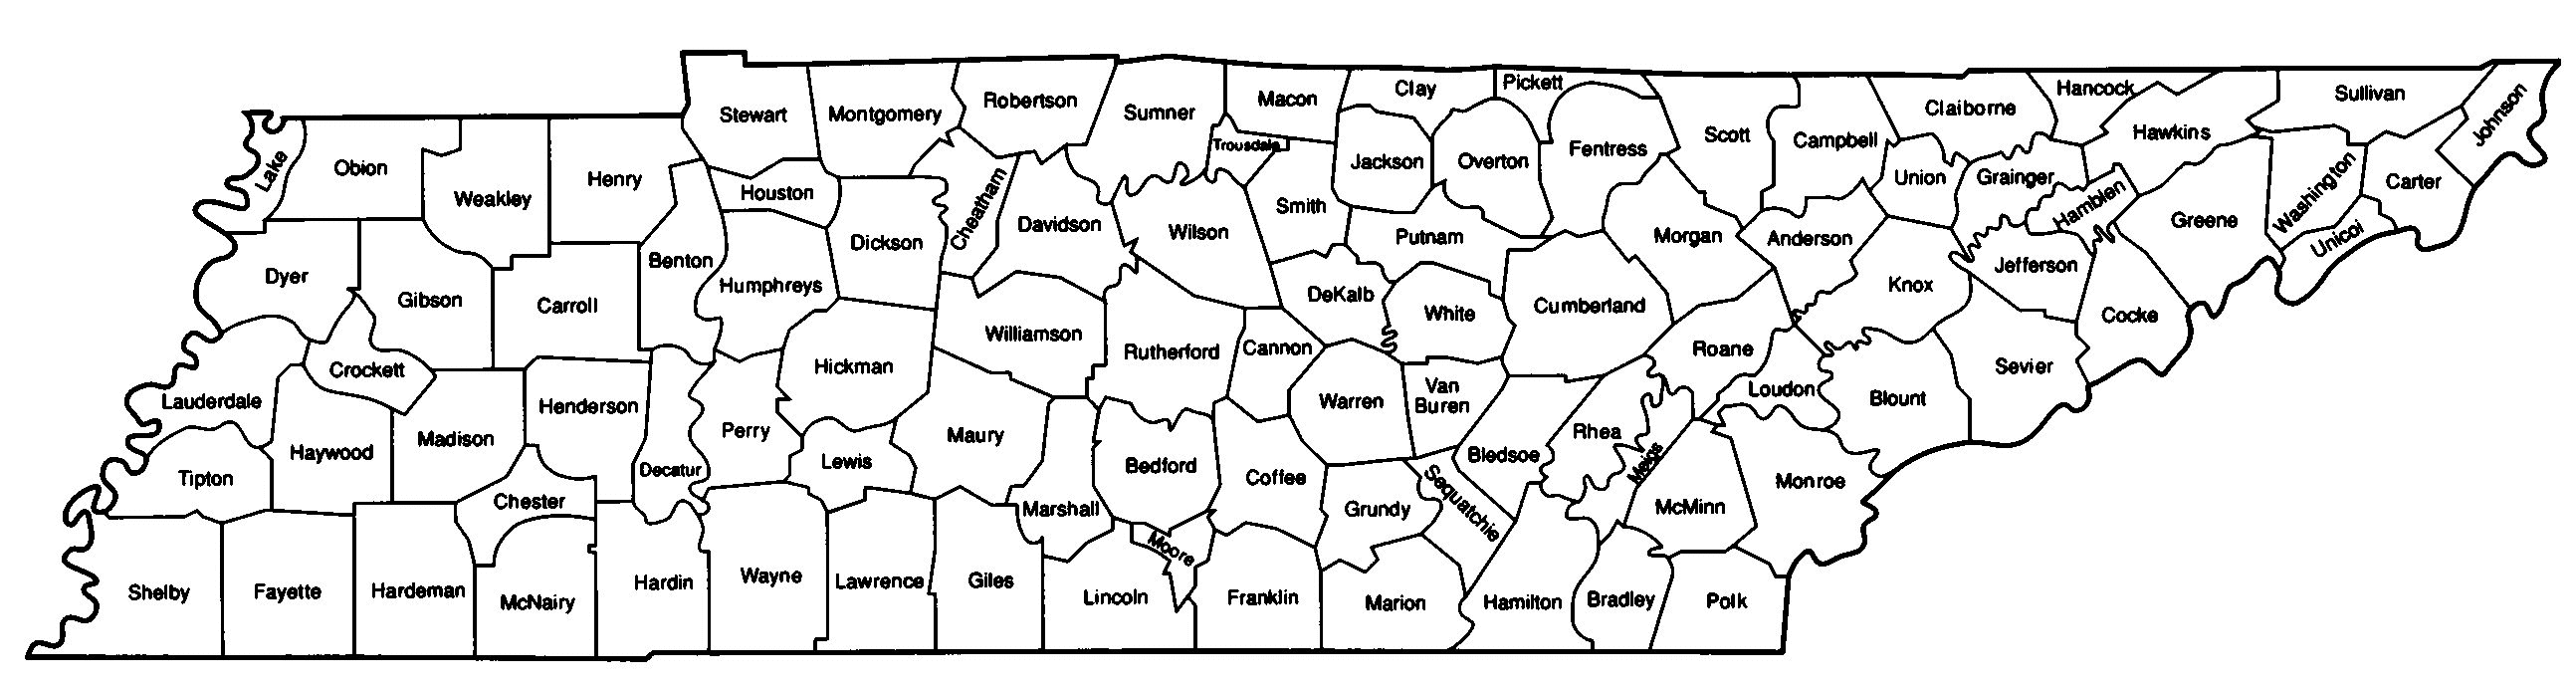 Figure 7: Map of Tennessee showing county names and boundaries